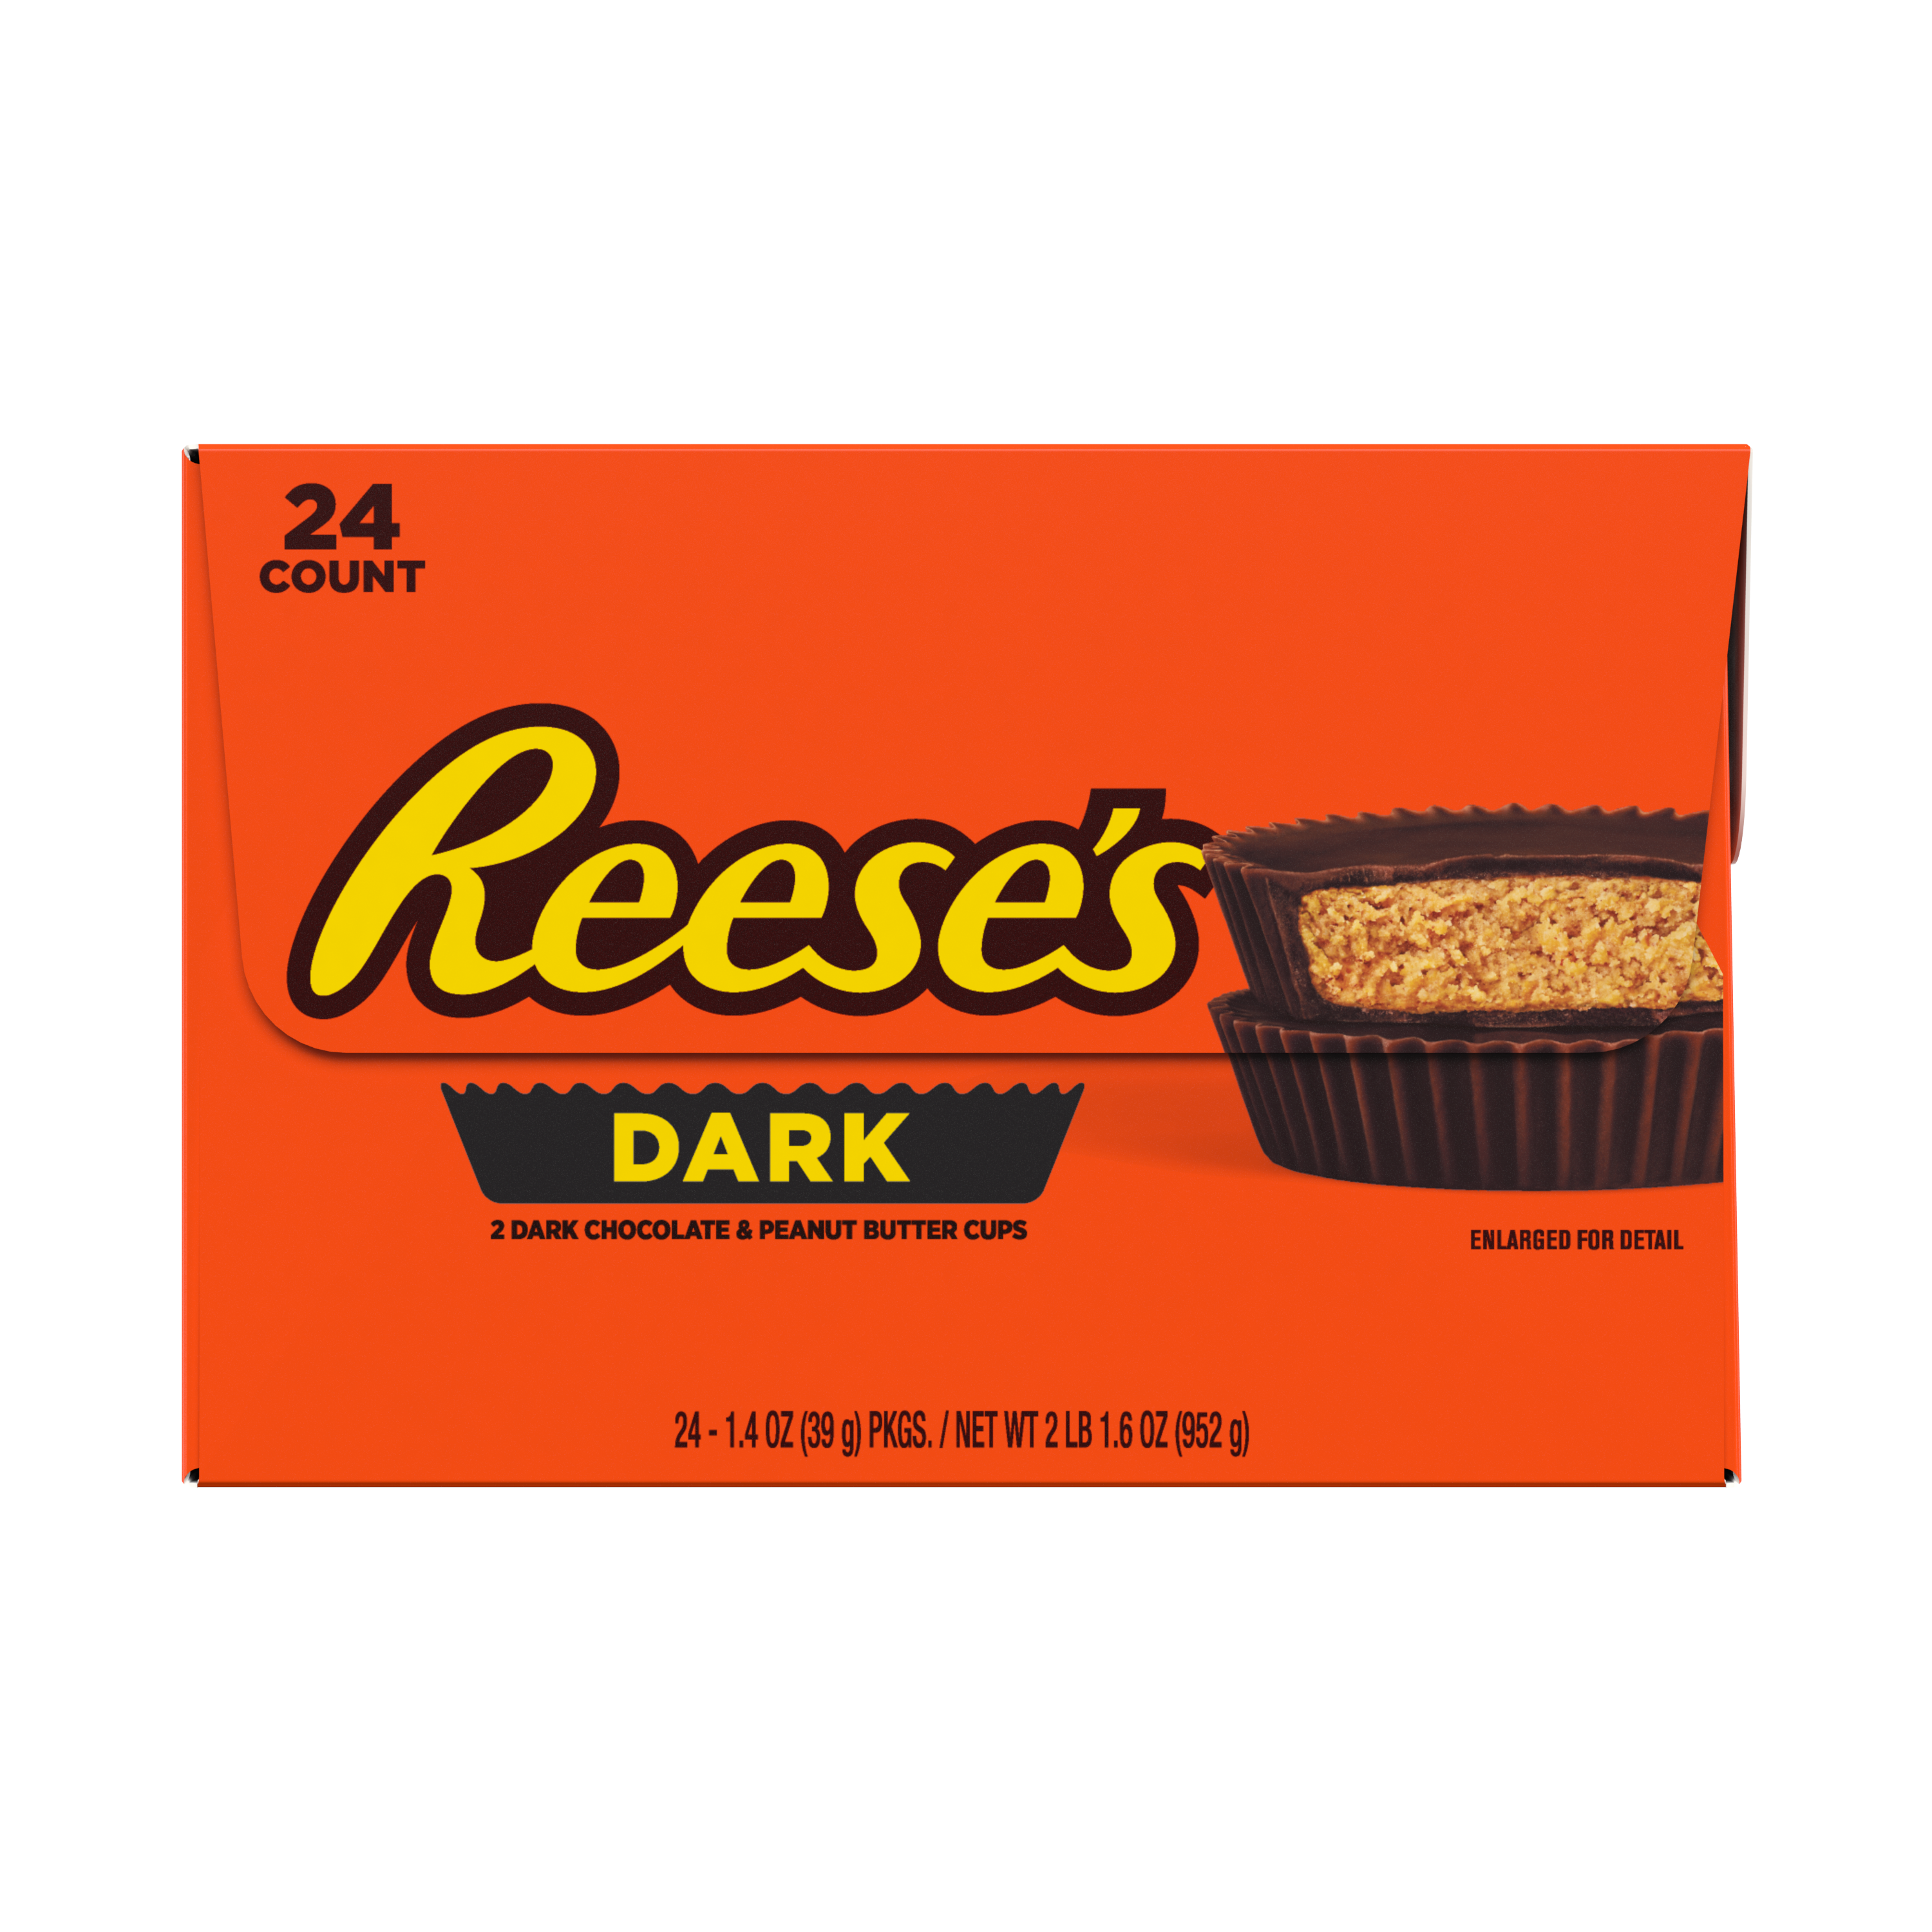 REESE'S Dark Chocolate Peanut Butter Cups, 33.6 oz box, 24 pack - Front of Package